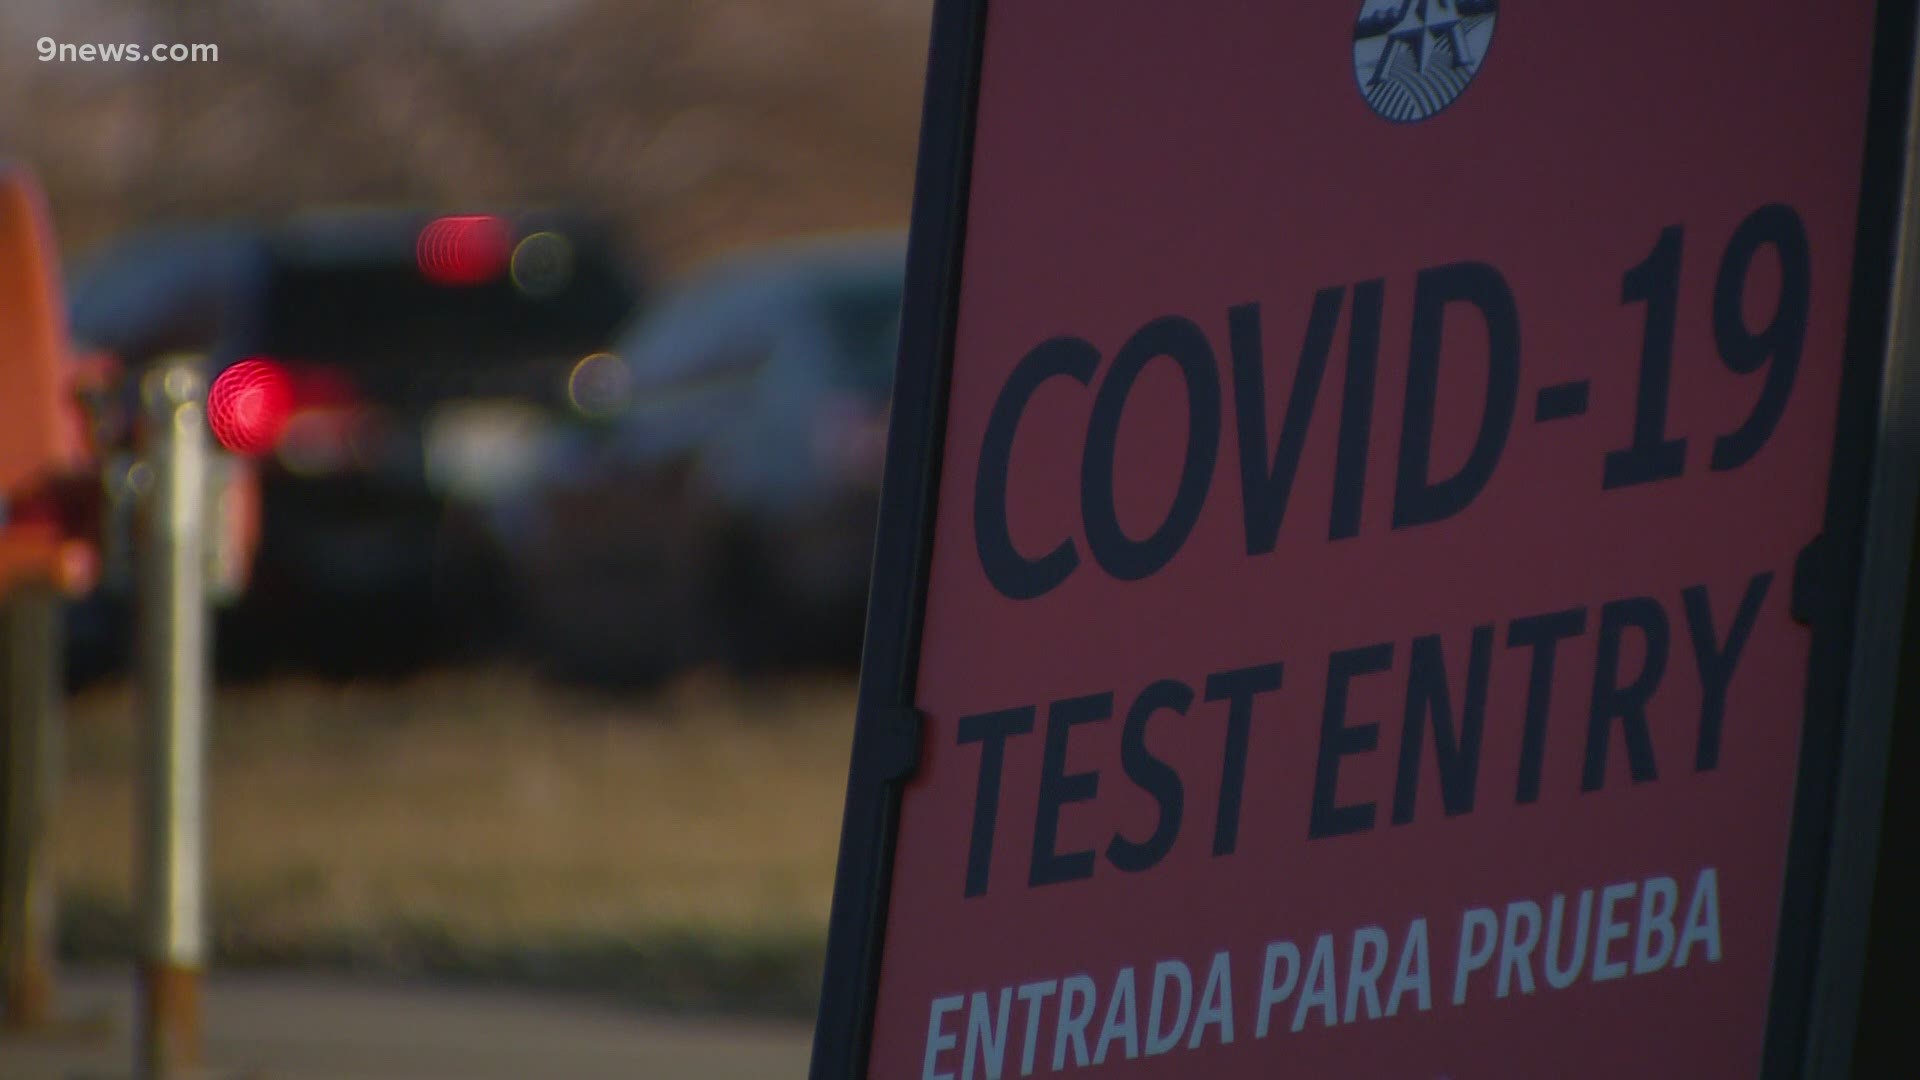 Medical experts say if someone tests negative for COVID-19 this week, it doesn't mean they will be healthy next week.